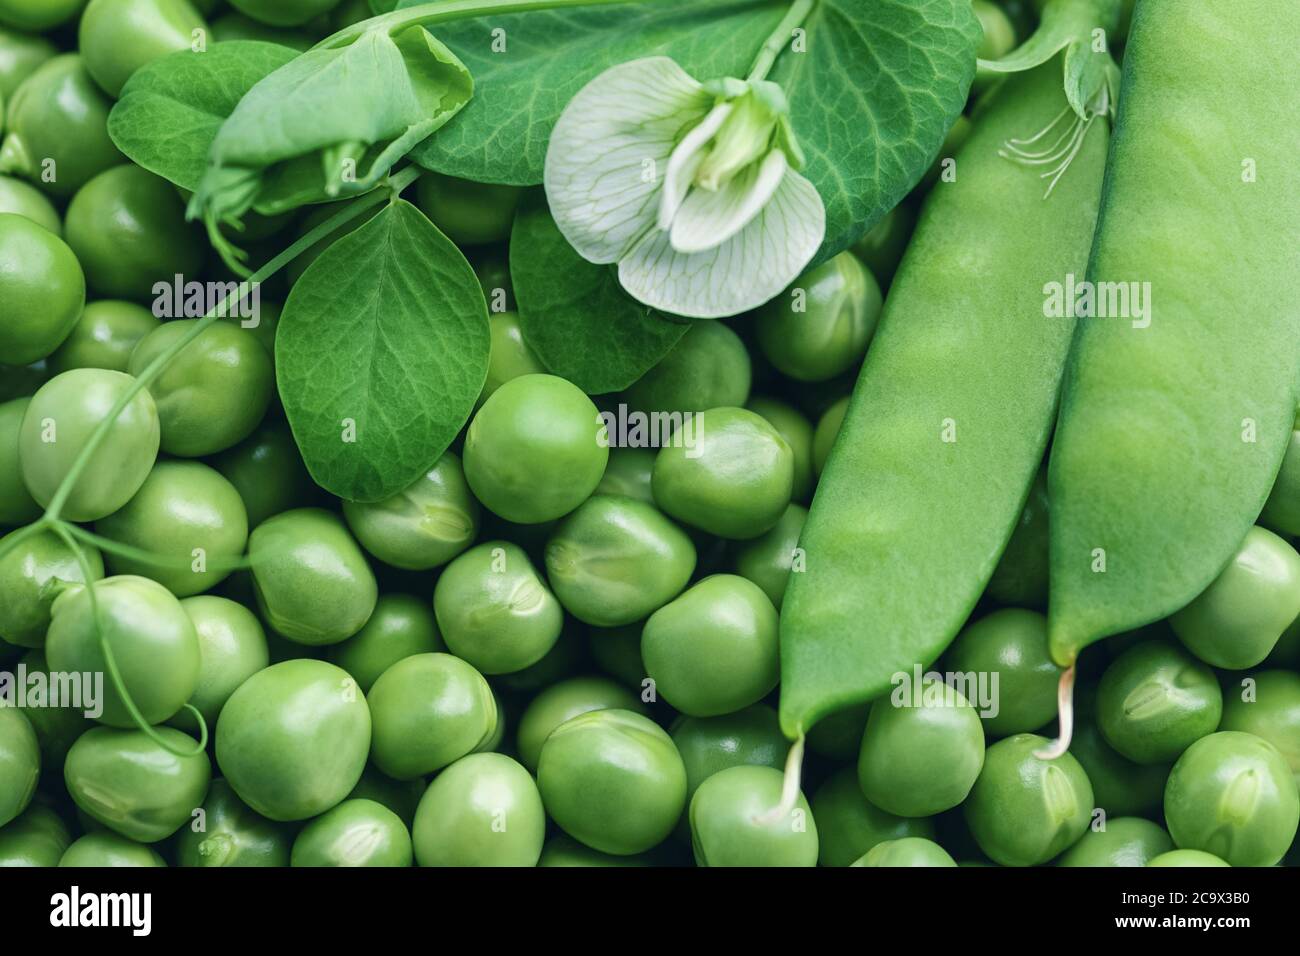 fresh green peas background with pea pods and flower on top Stock Photo